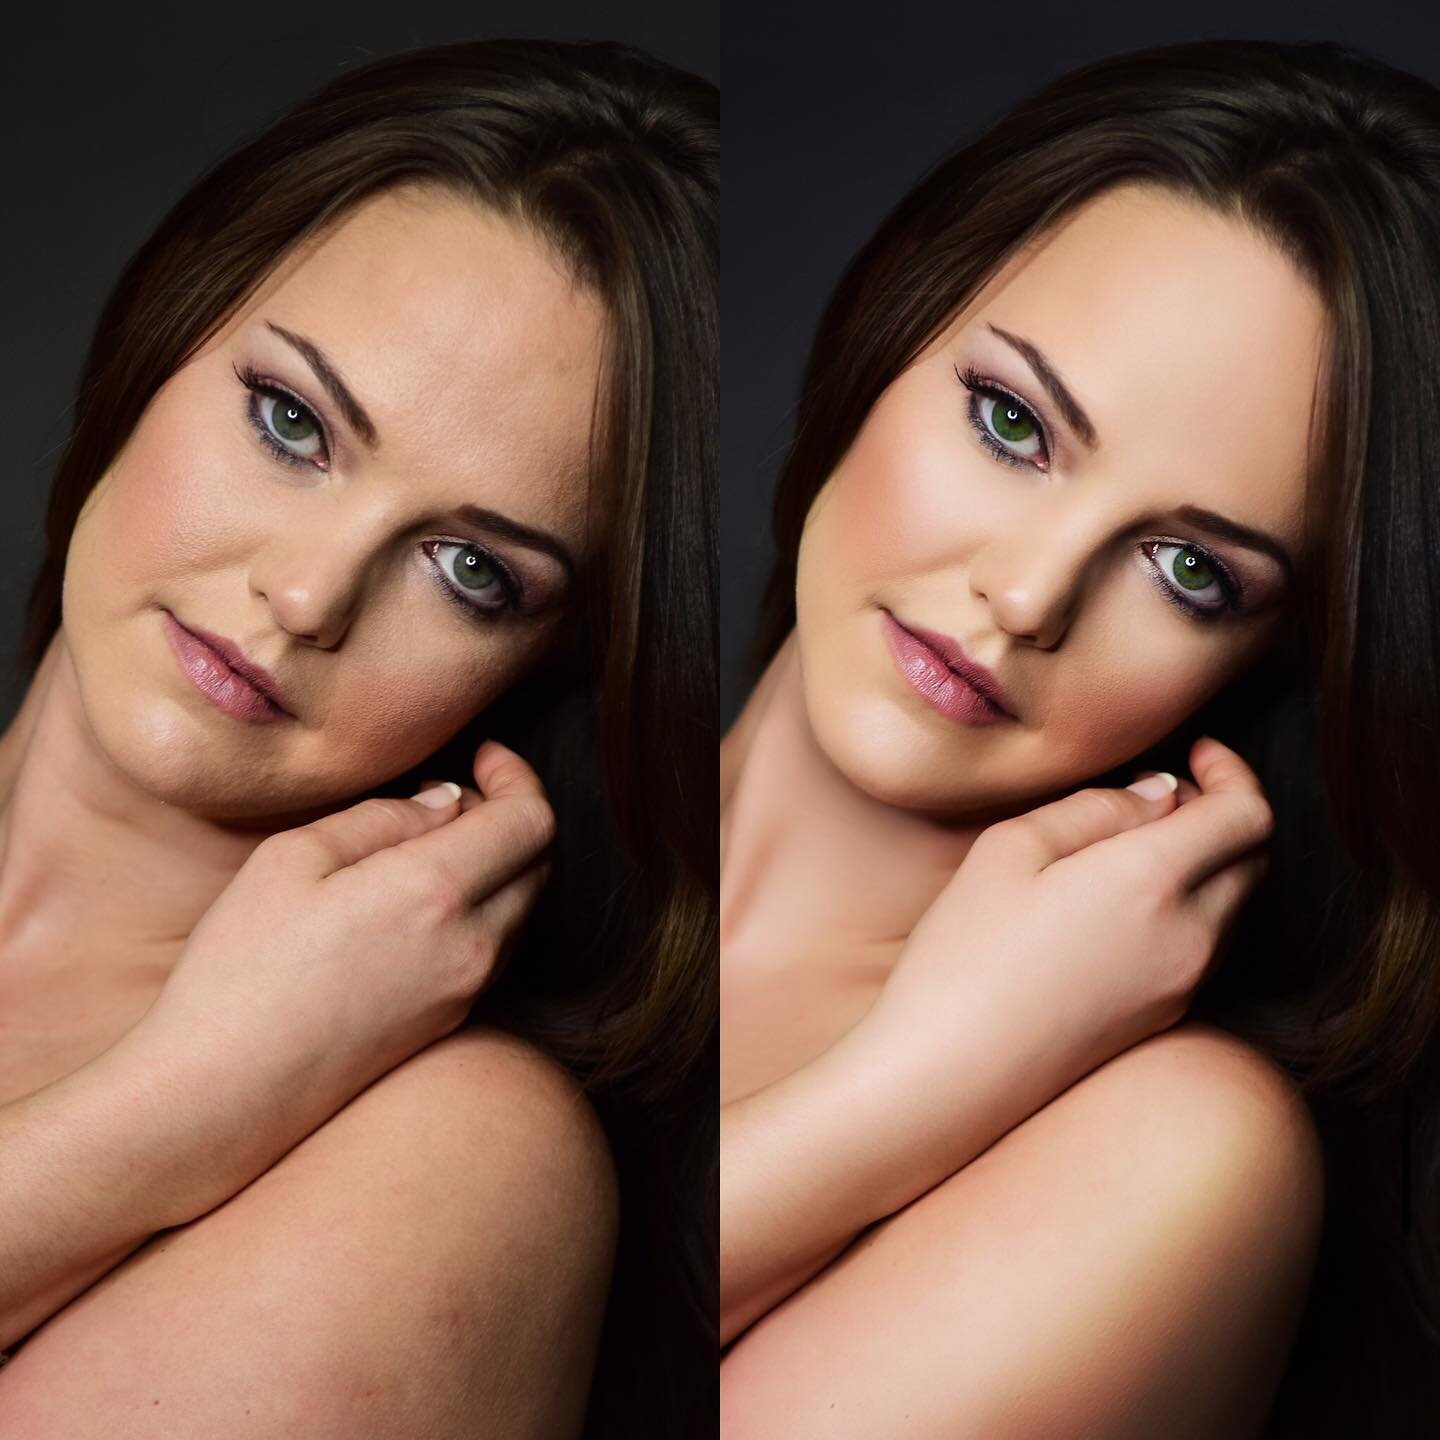 Before and after retouching 

Model: @missnlusted 
Shot by @christine_hayter 
Retouching by @metzki 

#frequencyseparation #photoshop #retouching #beforeandafter #creativecloud_immersed 

@photoshop @adobecreativecloud